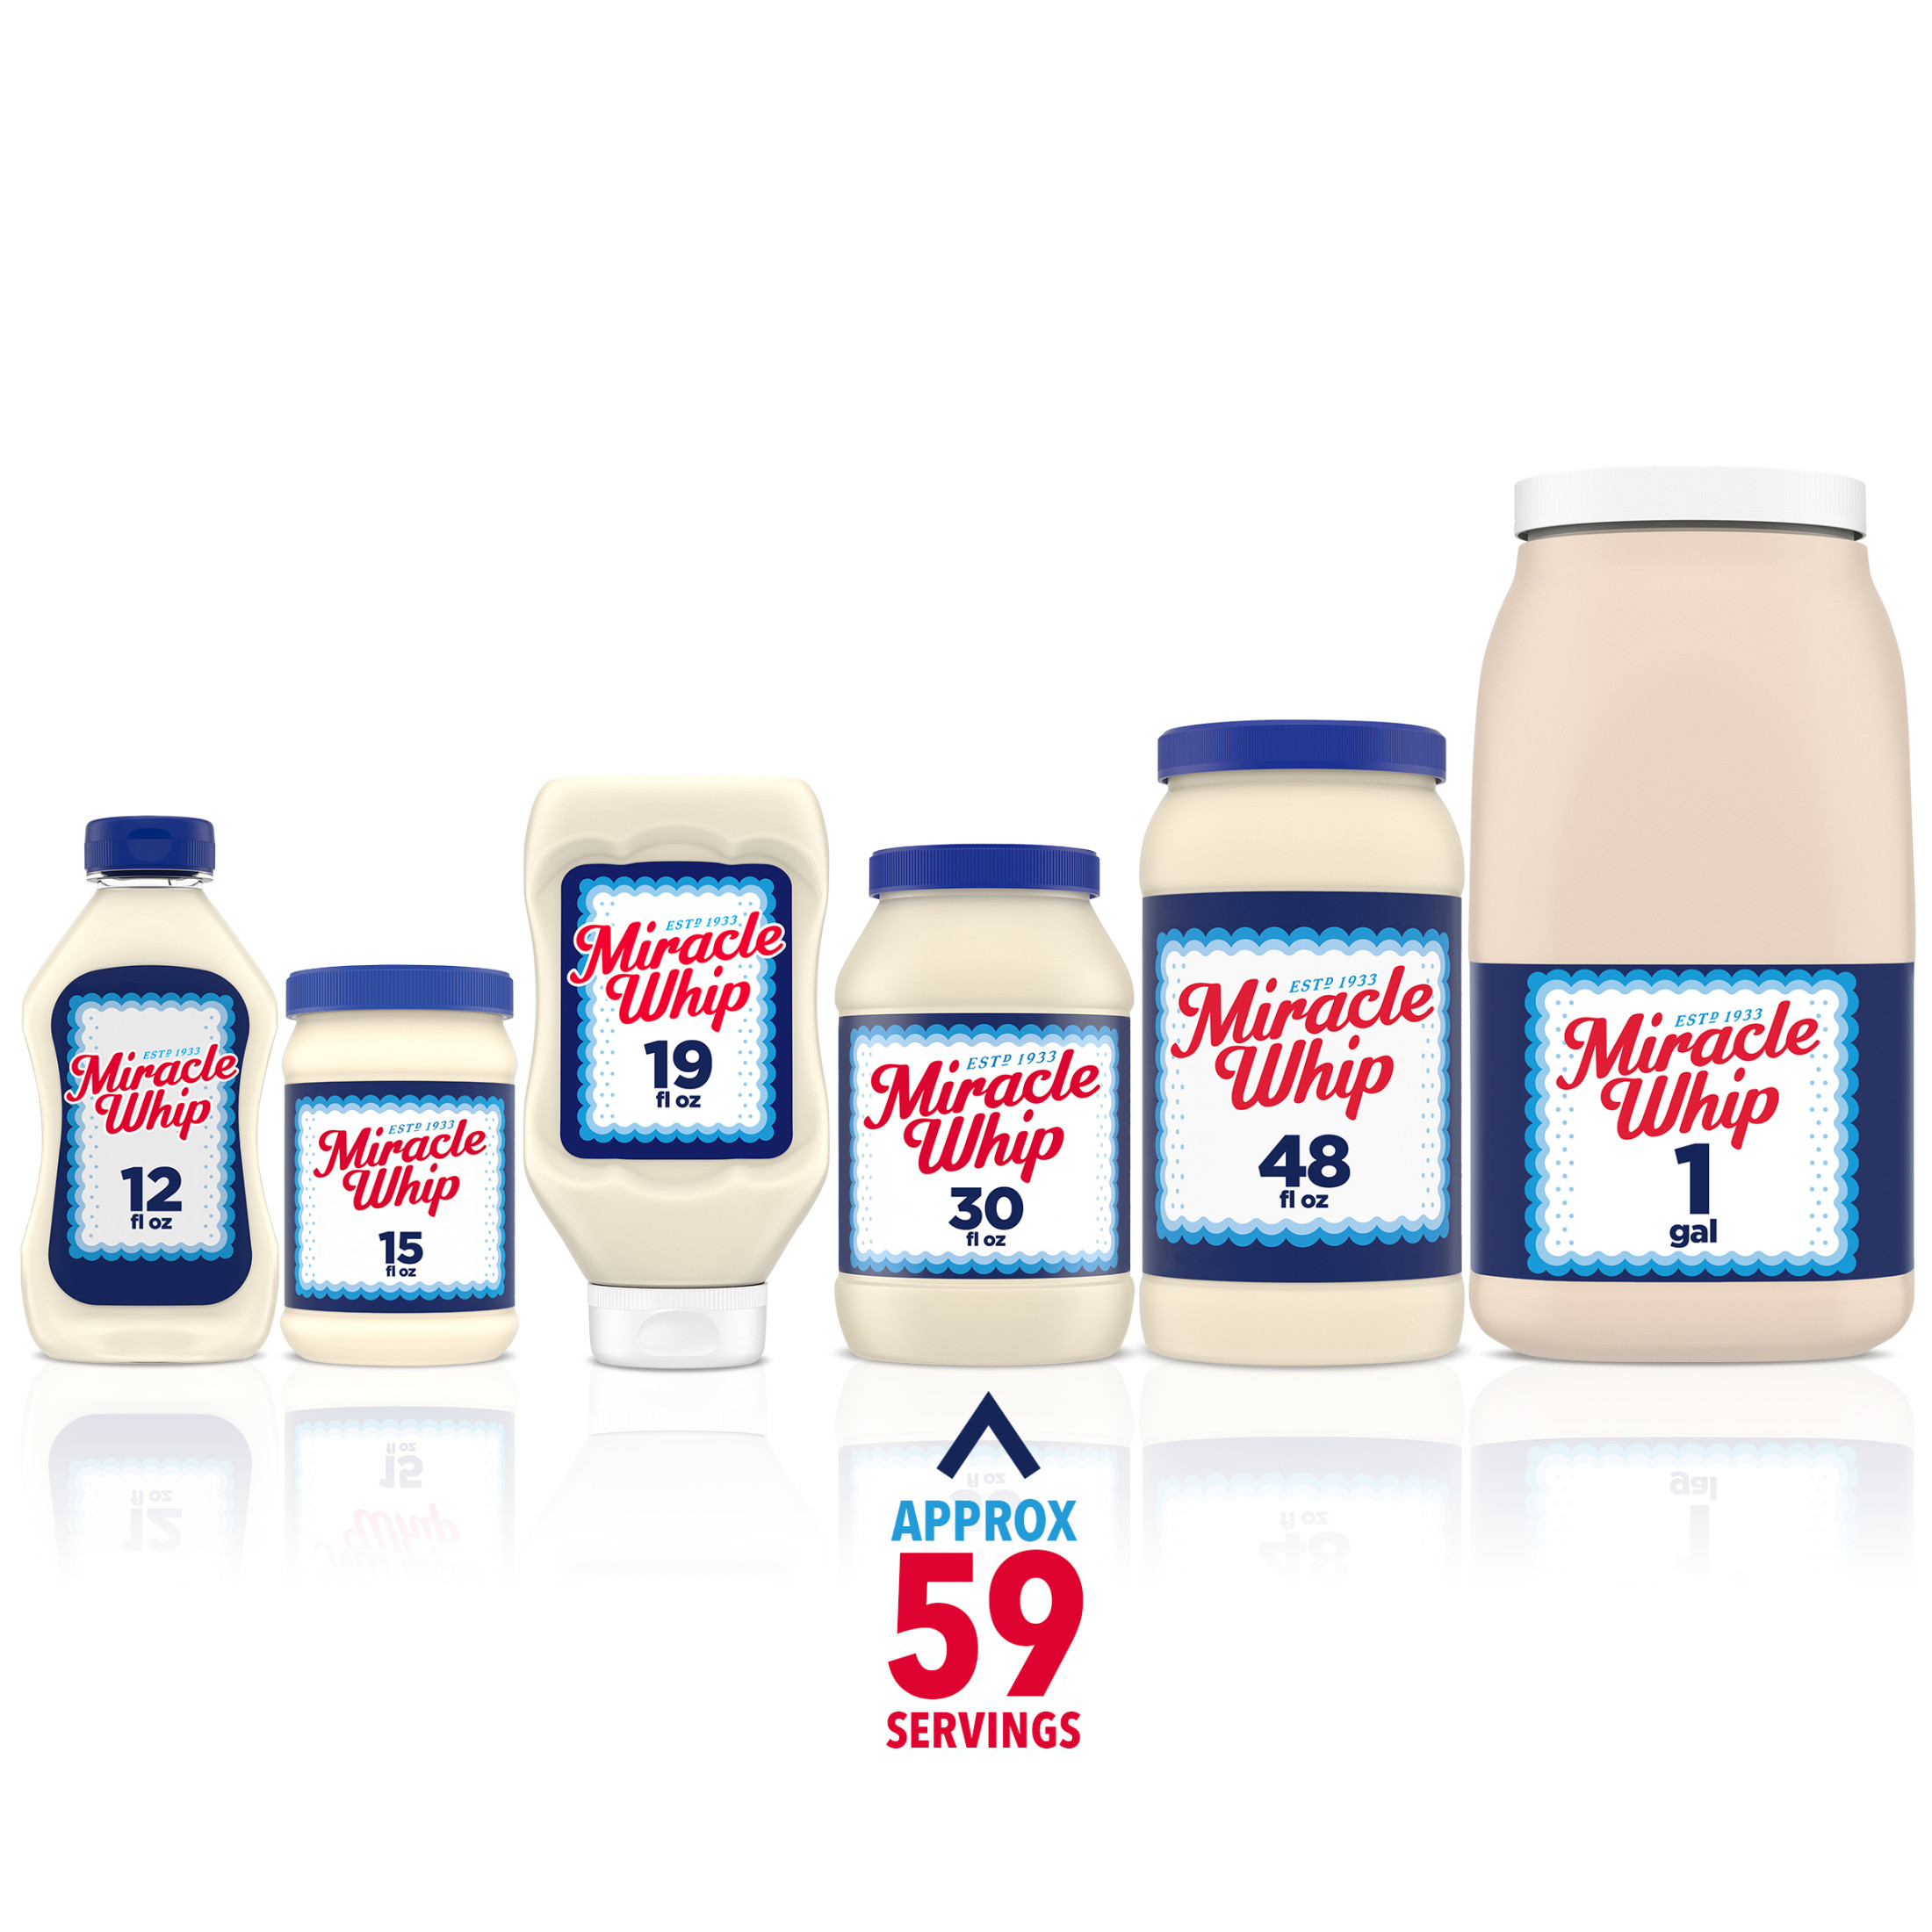 Miracle Whip Mayo-like Dressing, for a Keto and Low Carb Lifestyle, 30 fl oz Jar - image 4 of 16